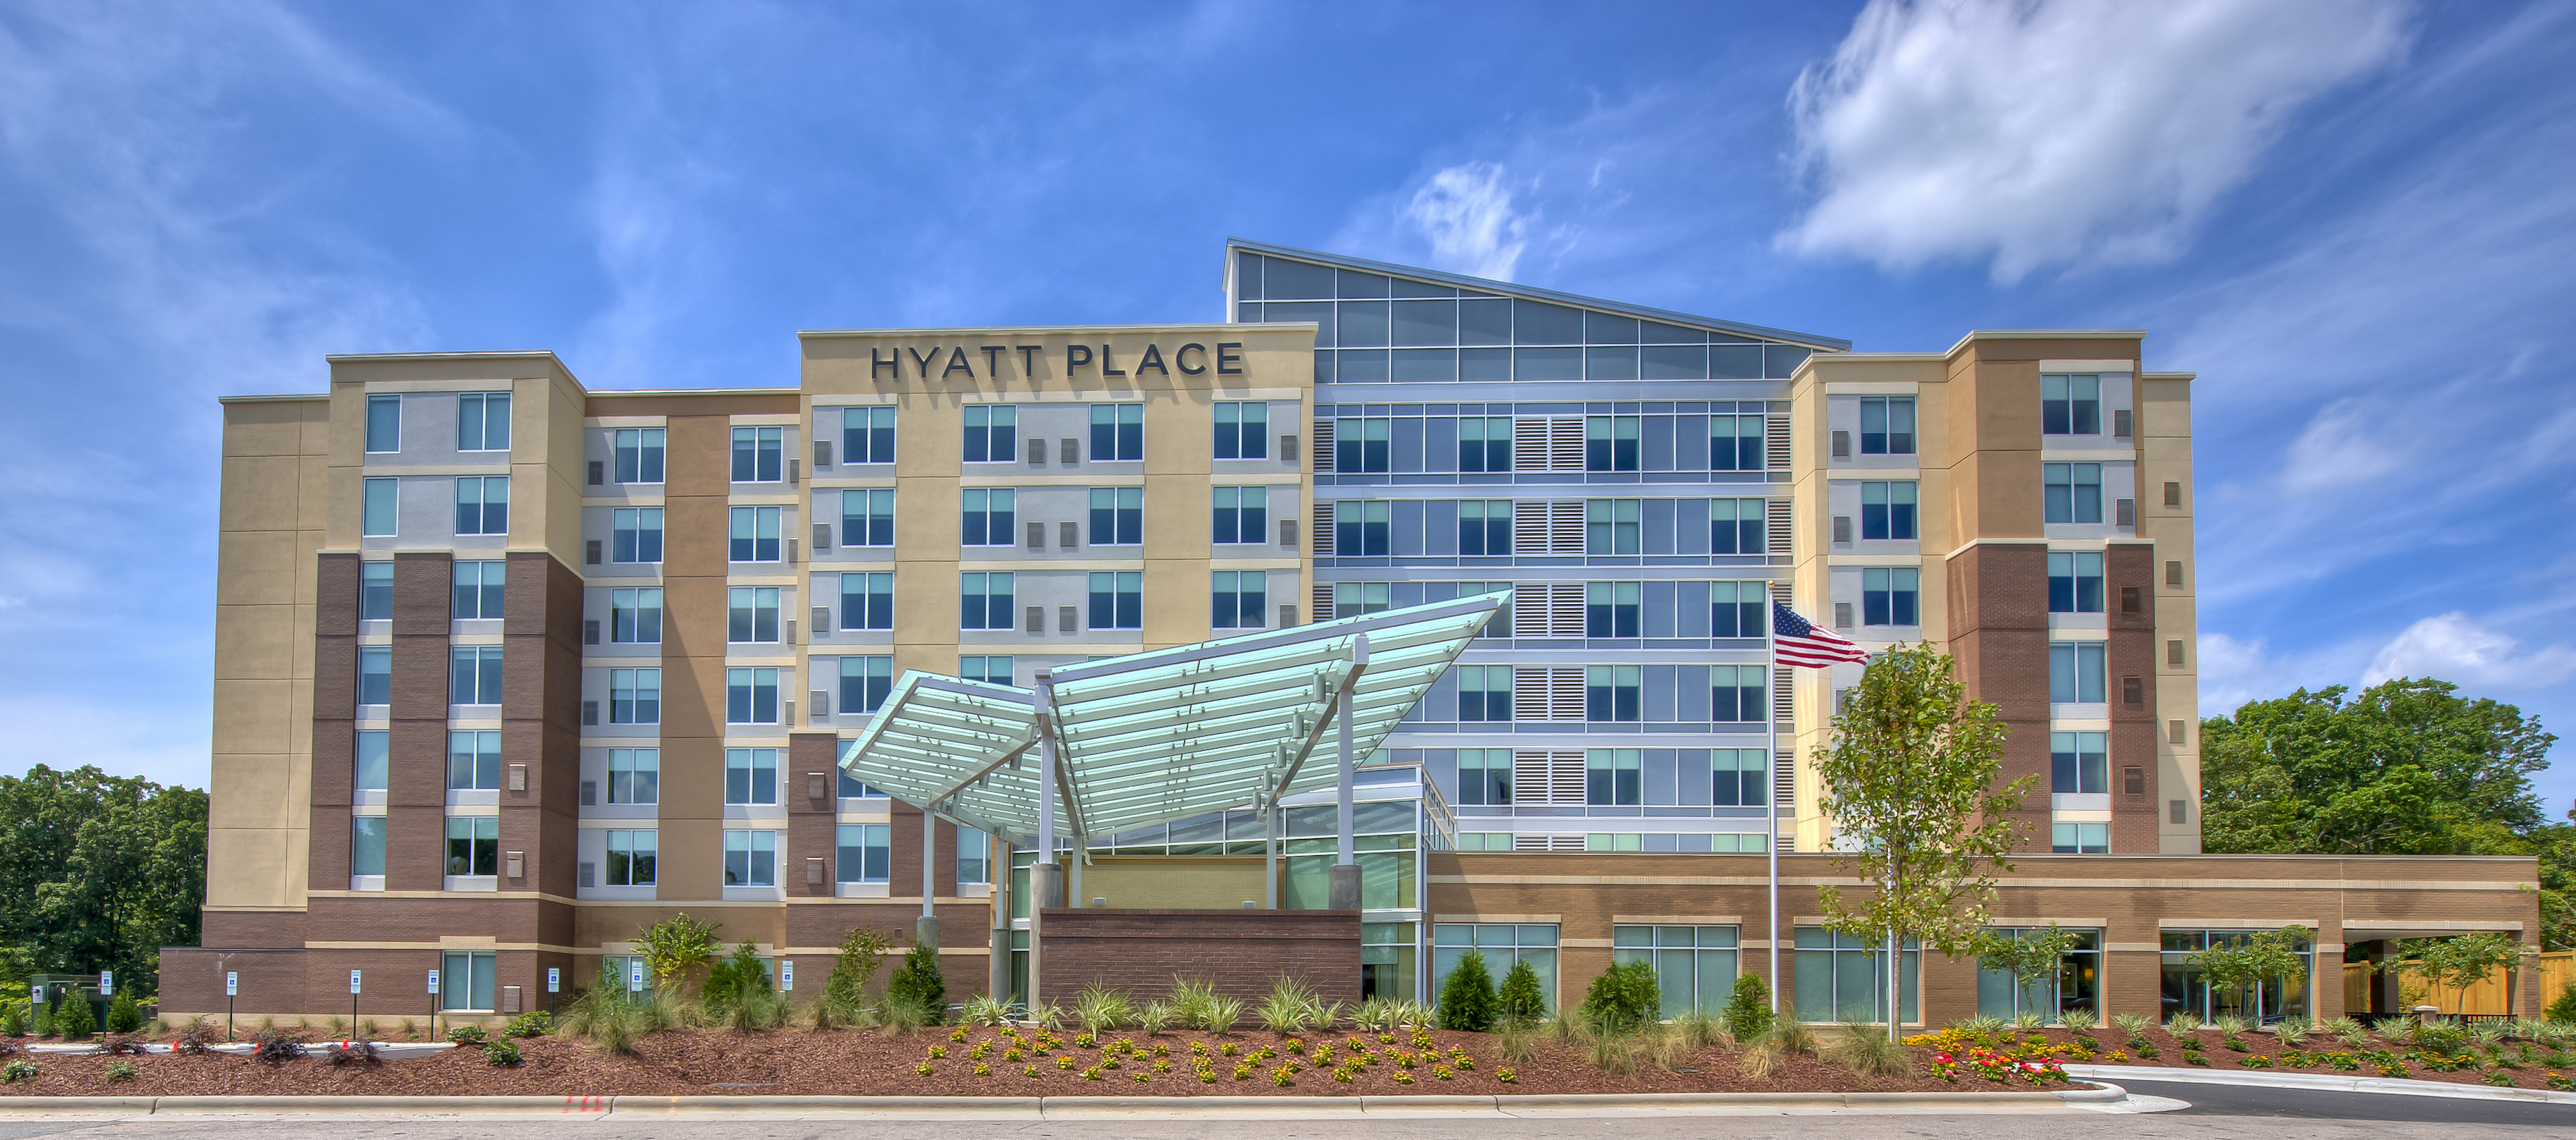 Front-on view of the exterior of the Hyatt Place Hotel in Durham